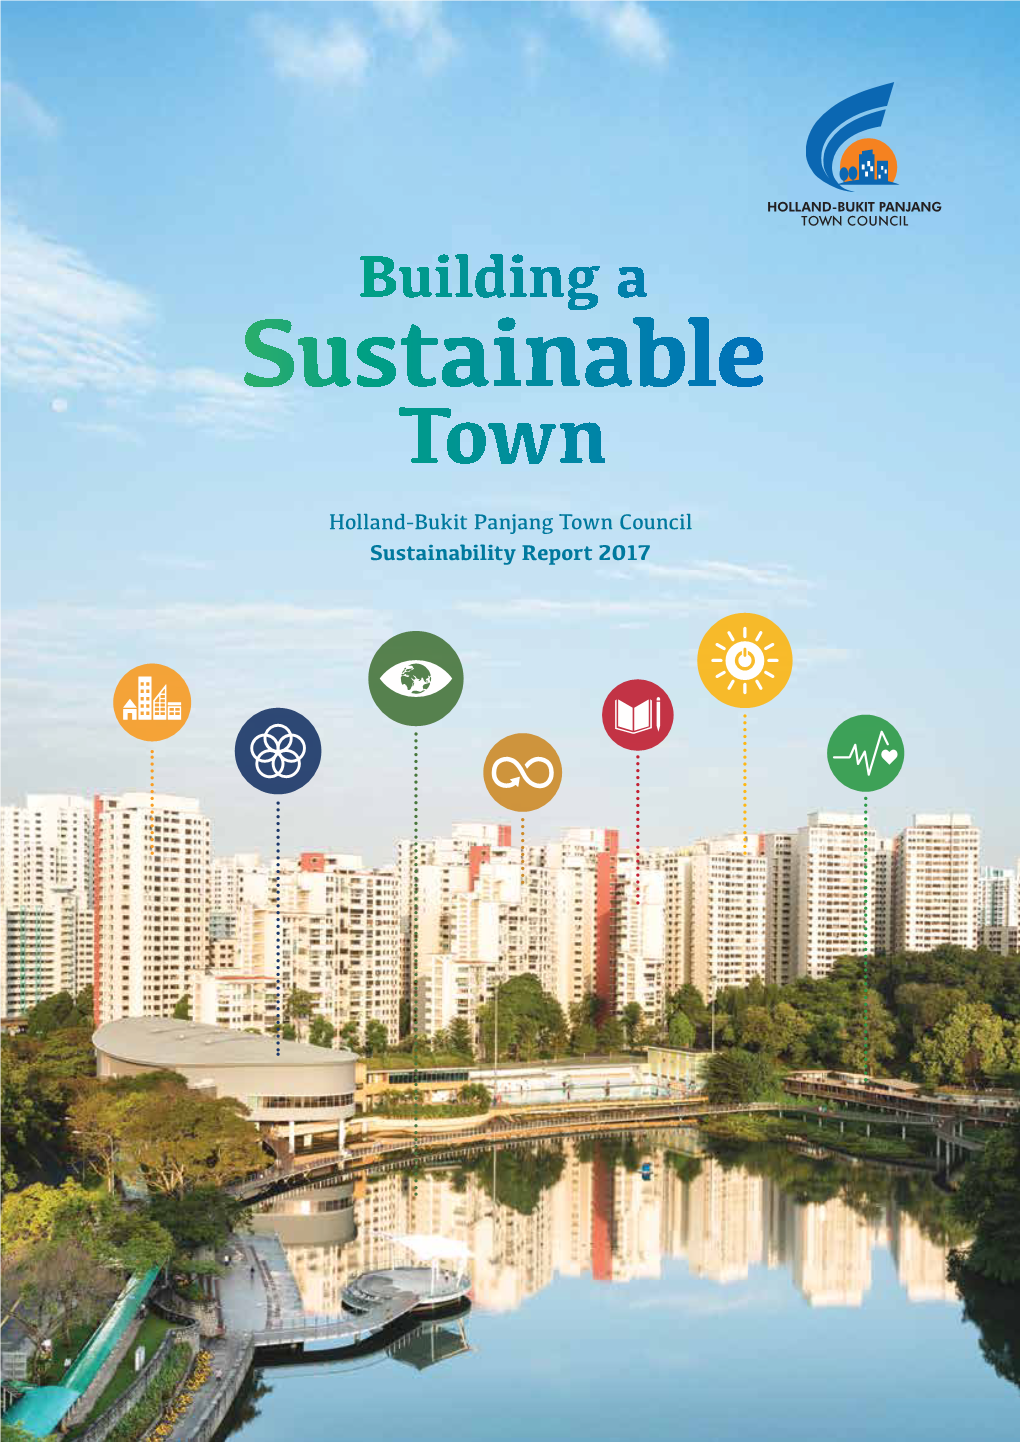 Download Sustainability Report (3.56